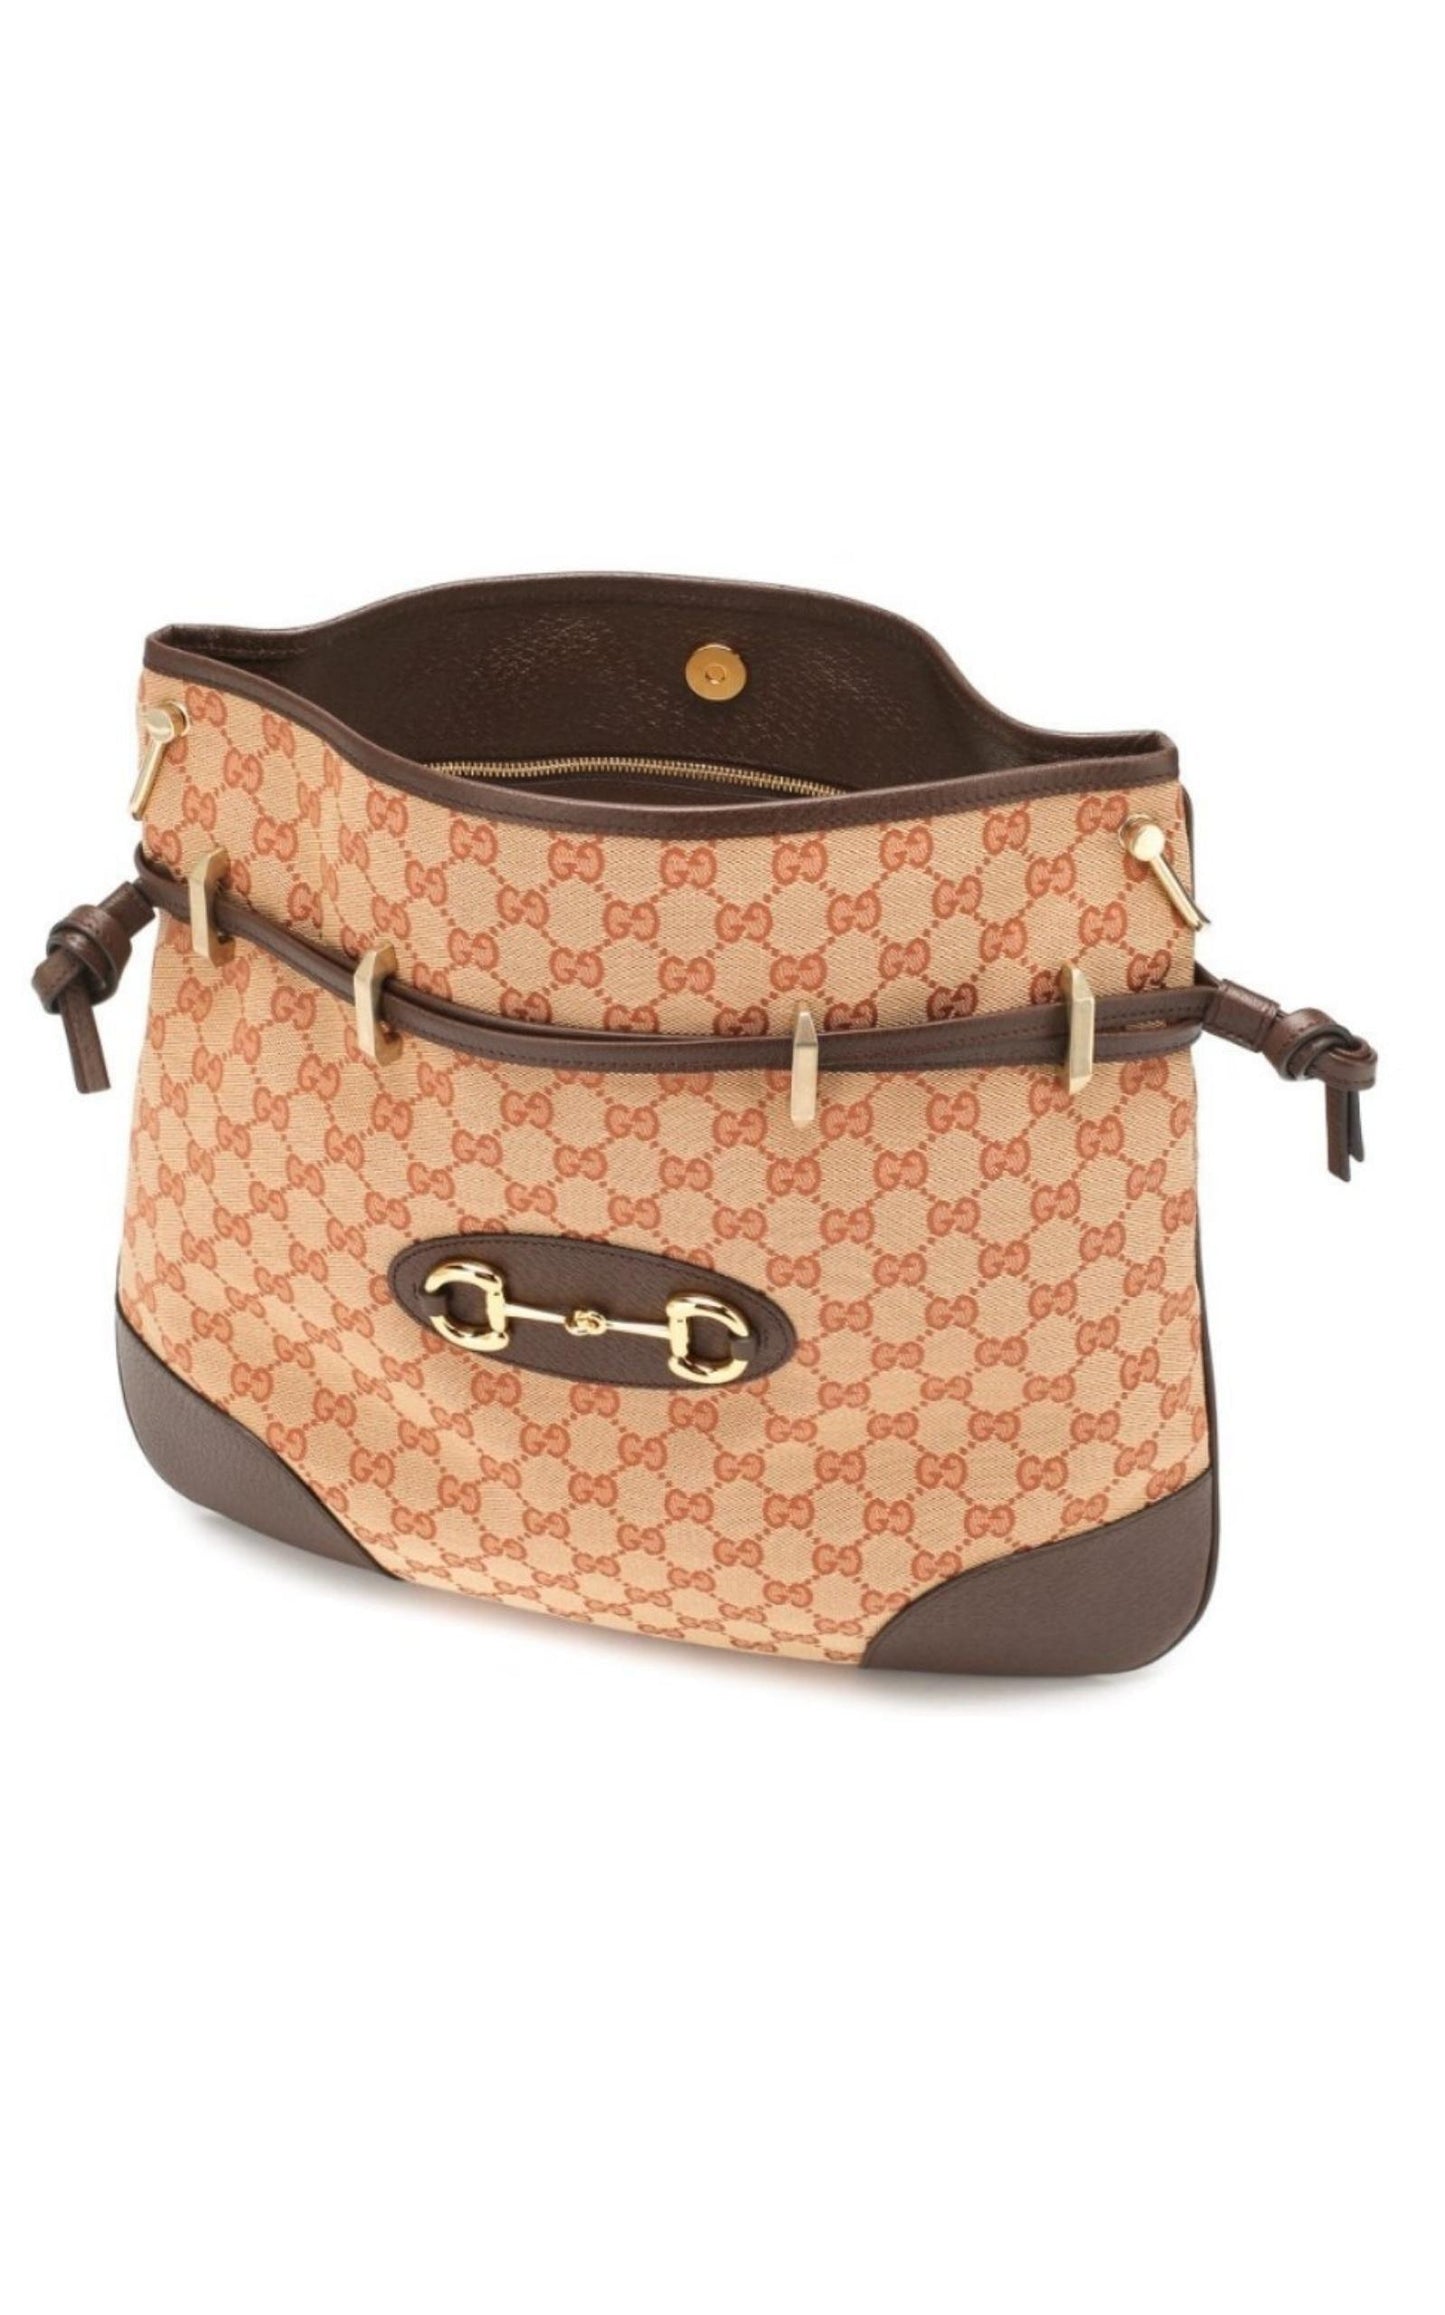  GucciLeather and GG Supreme Fabric Shoulder Bag - Runway Catalog